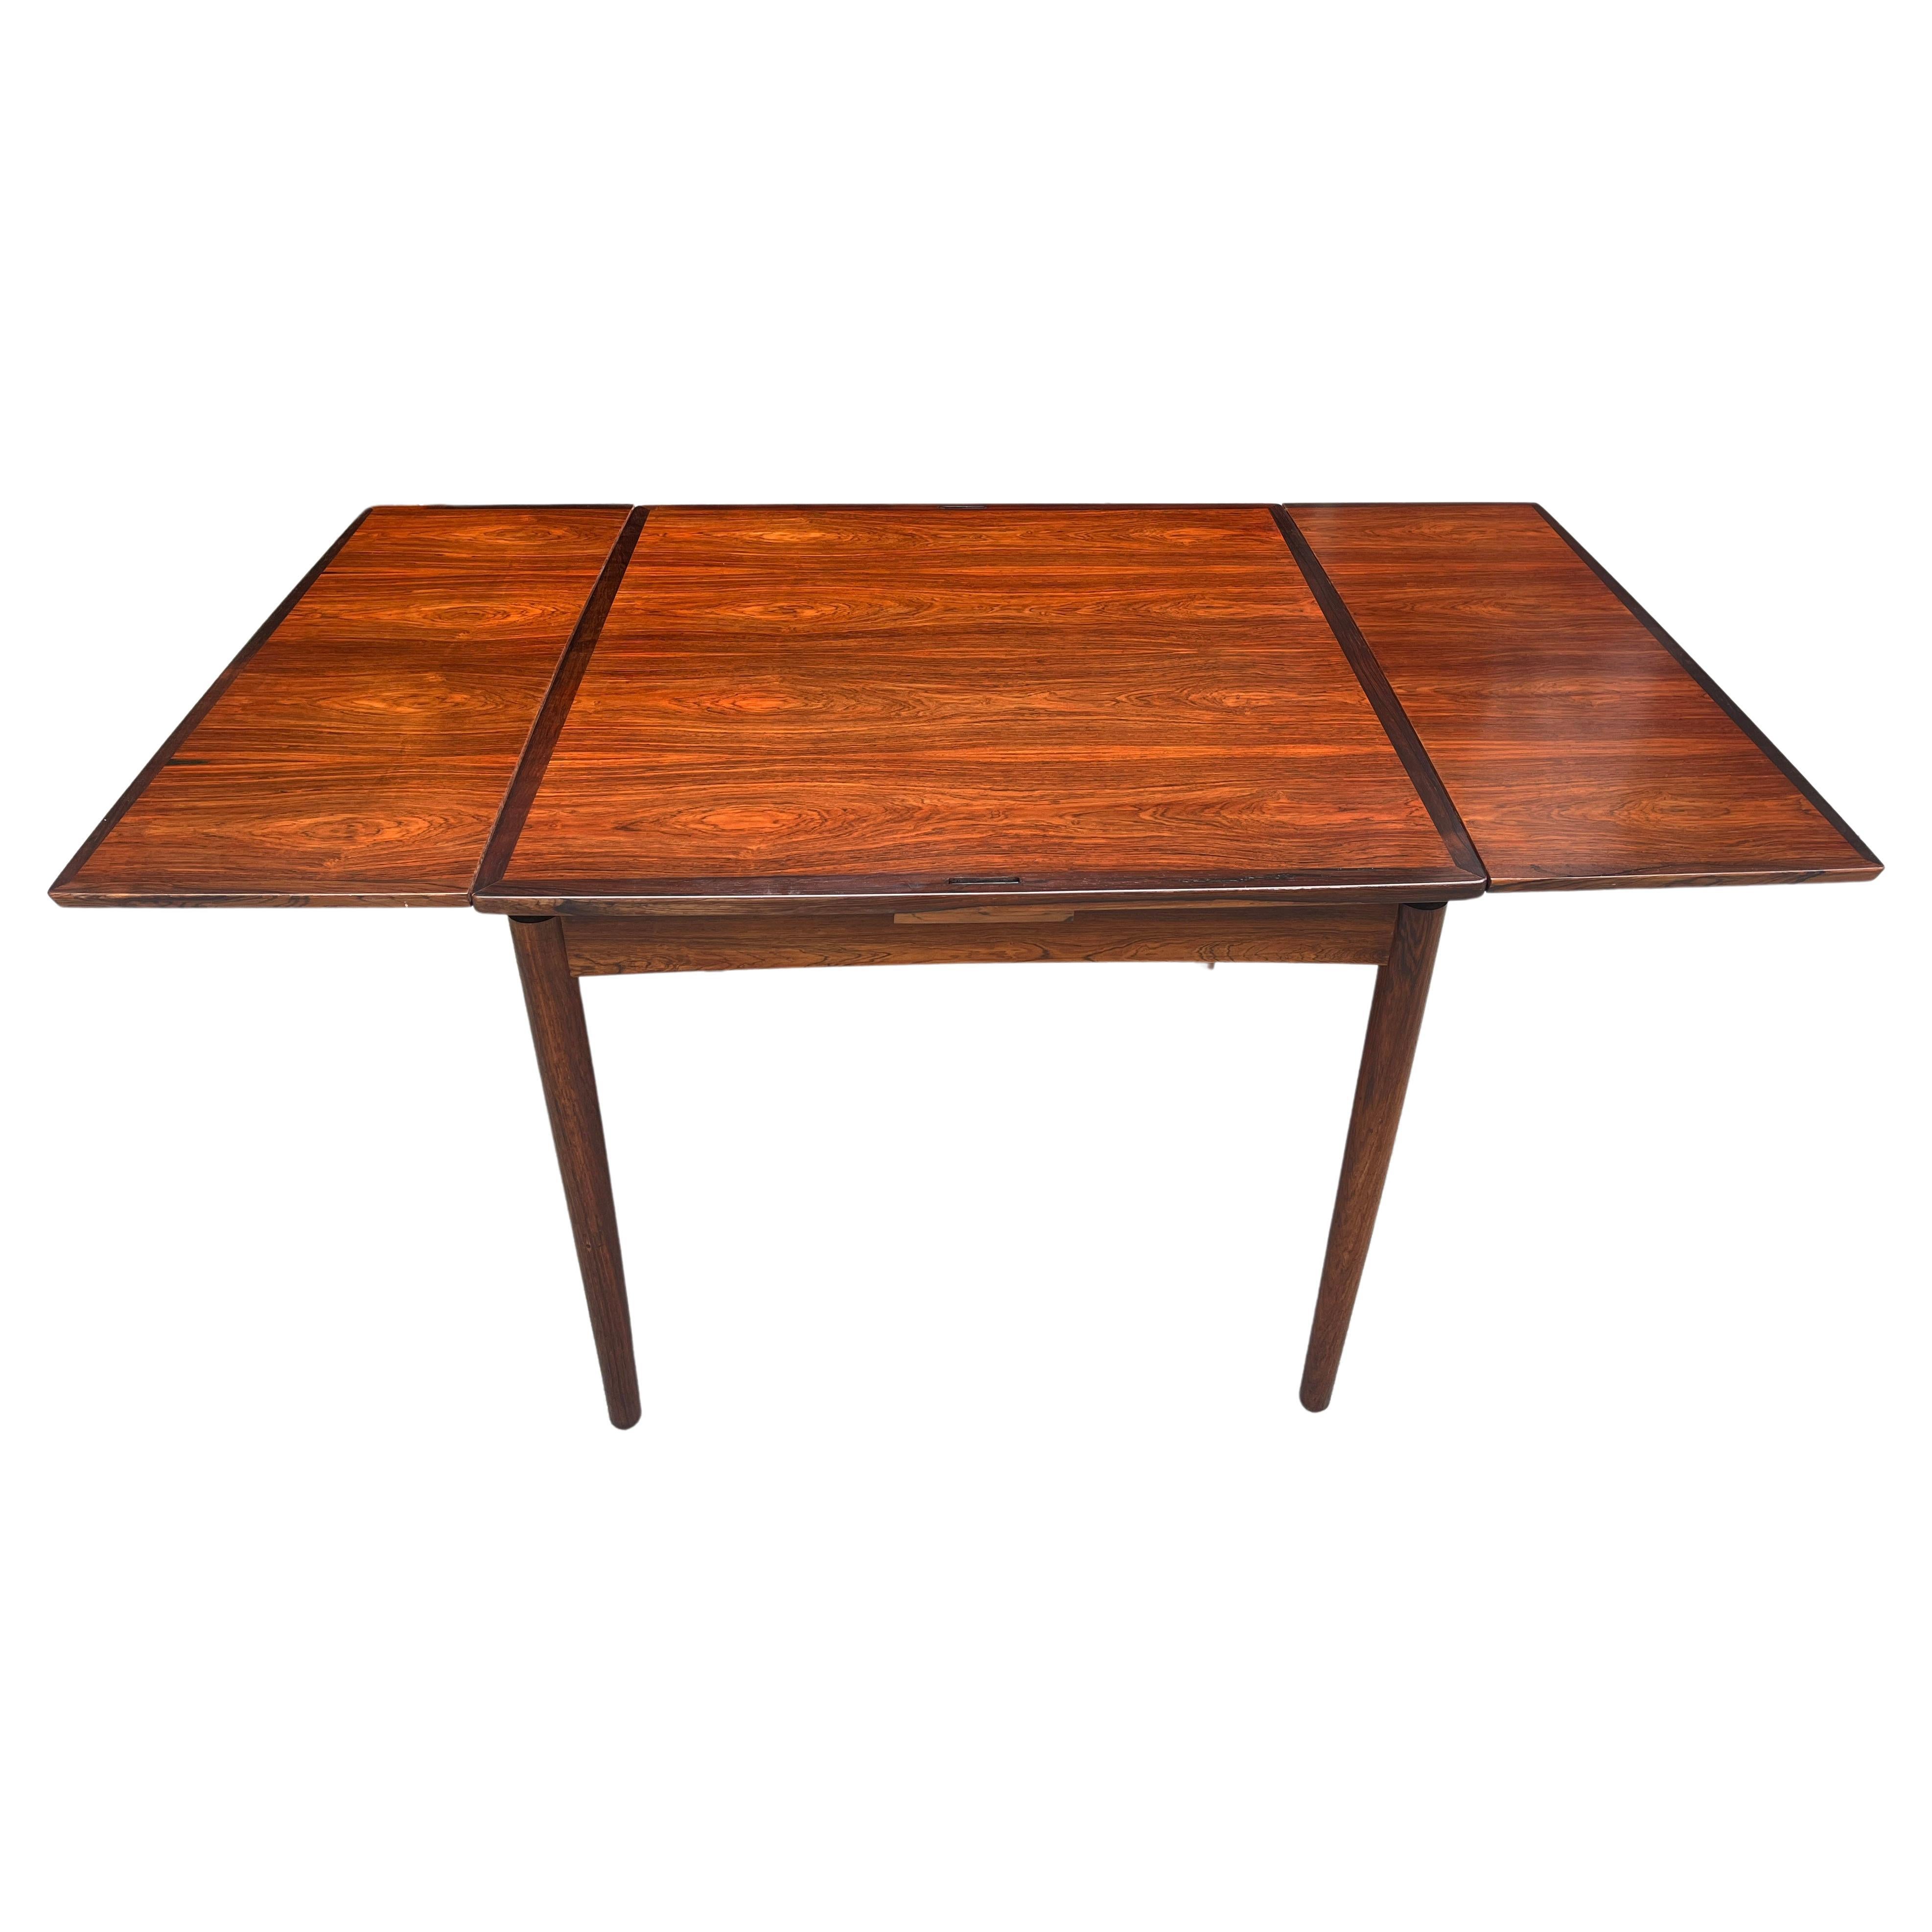 Rosewood dining table designed by Carlo Jensen for Hundevad & Co. This practical design is perfect for smaller spaces. The table can be used with the rosewood top and the leaves tucked in or extended. The square top can also be flipped over to use